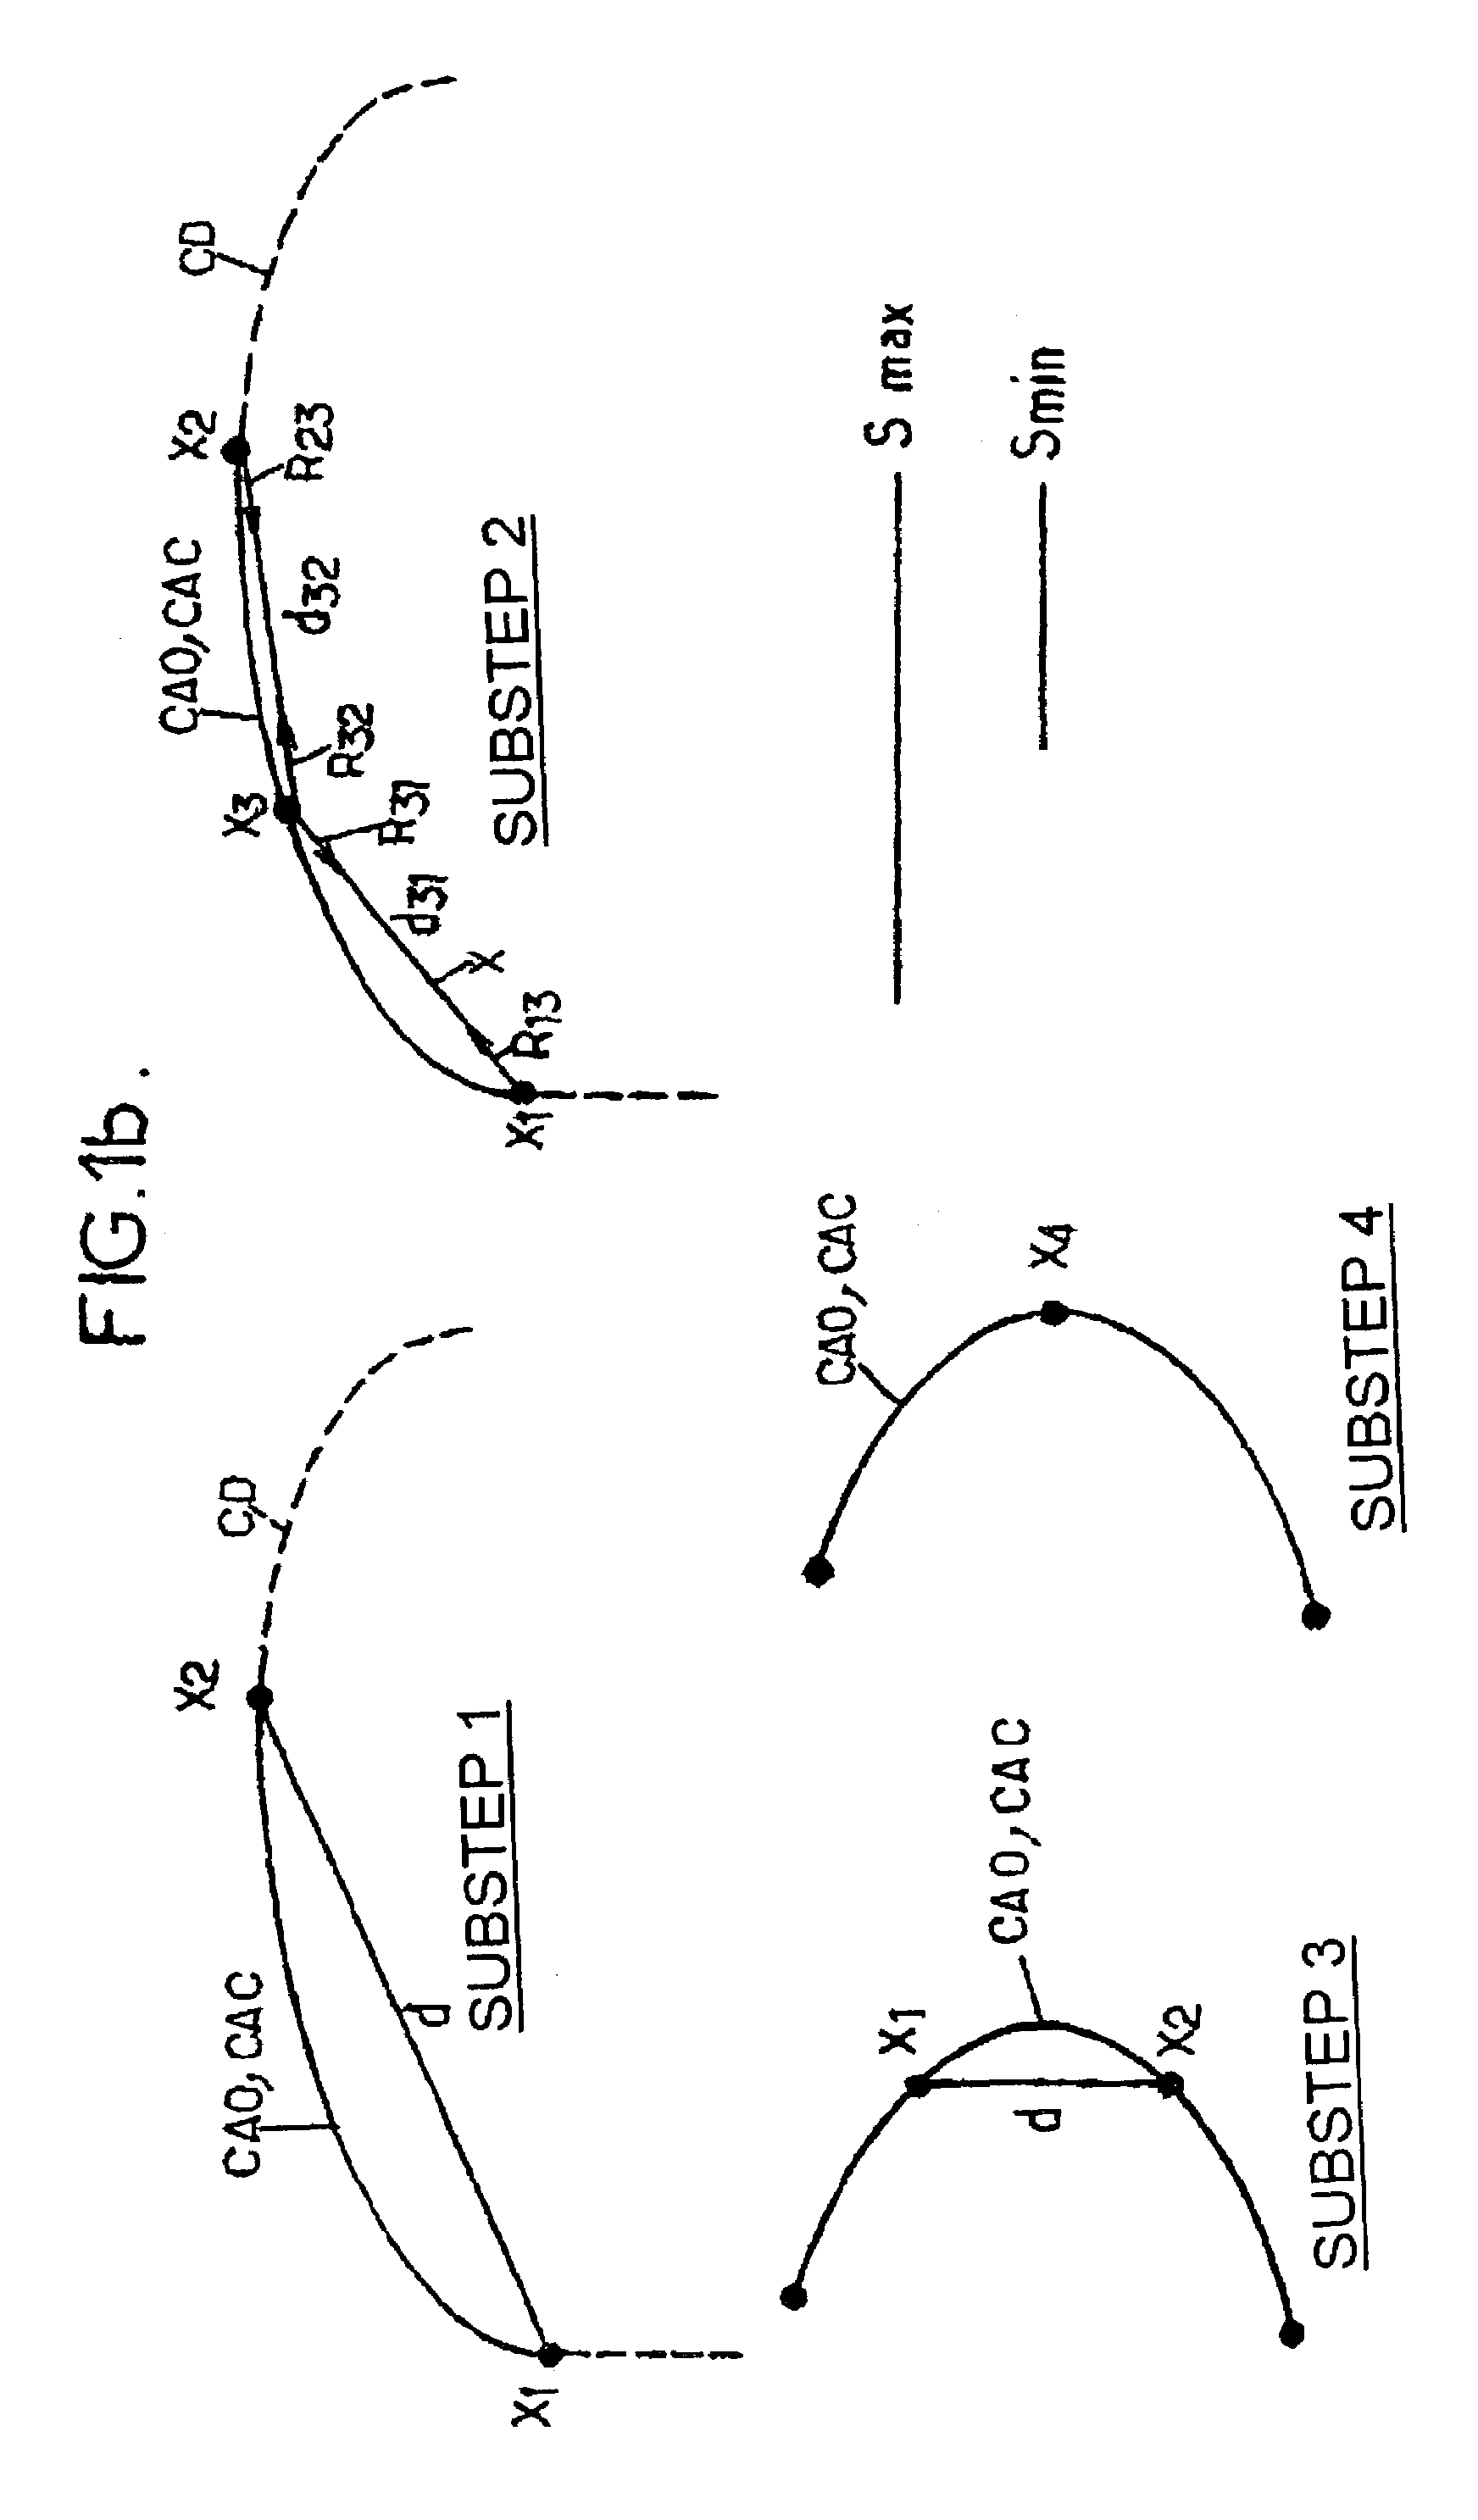 Method for segmenting a video image into elementary objects